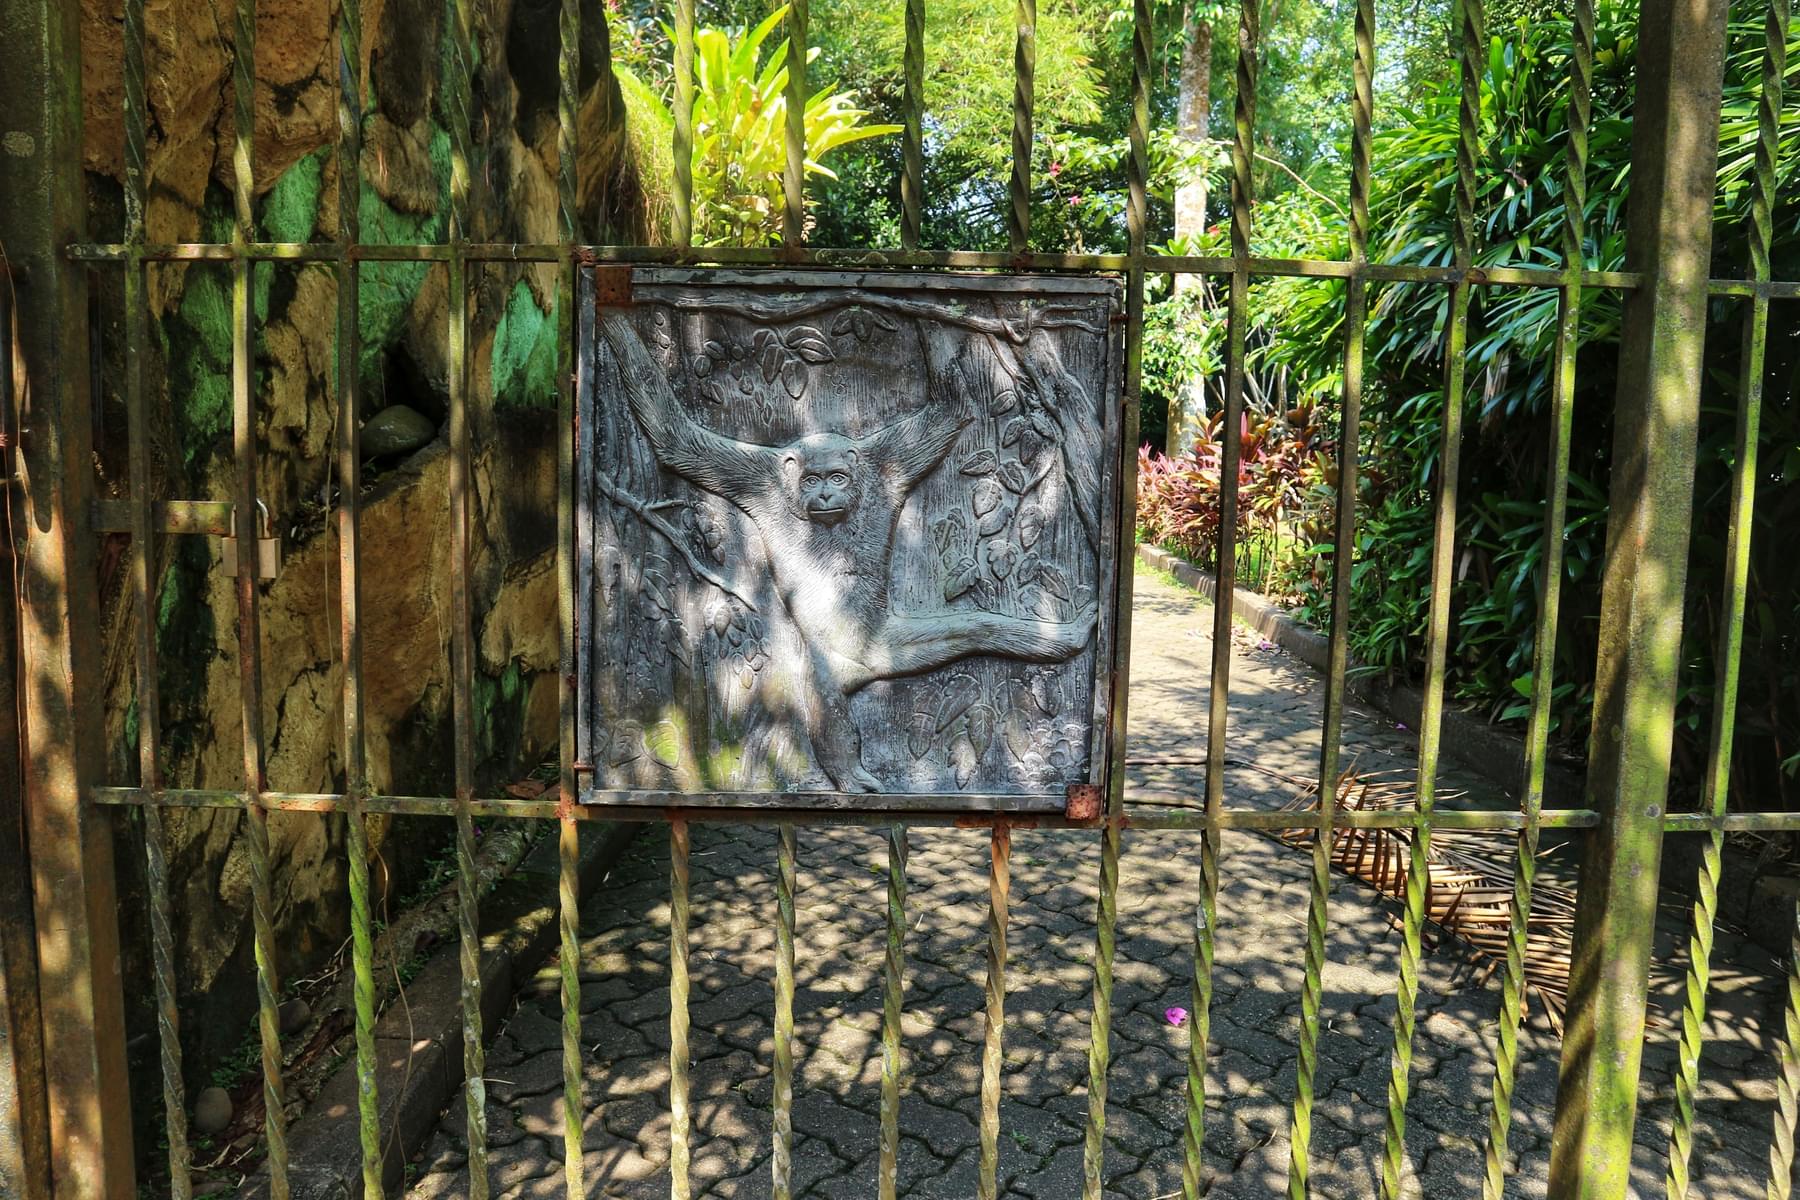 Know Before You Go to Singapore Zoo